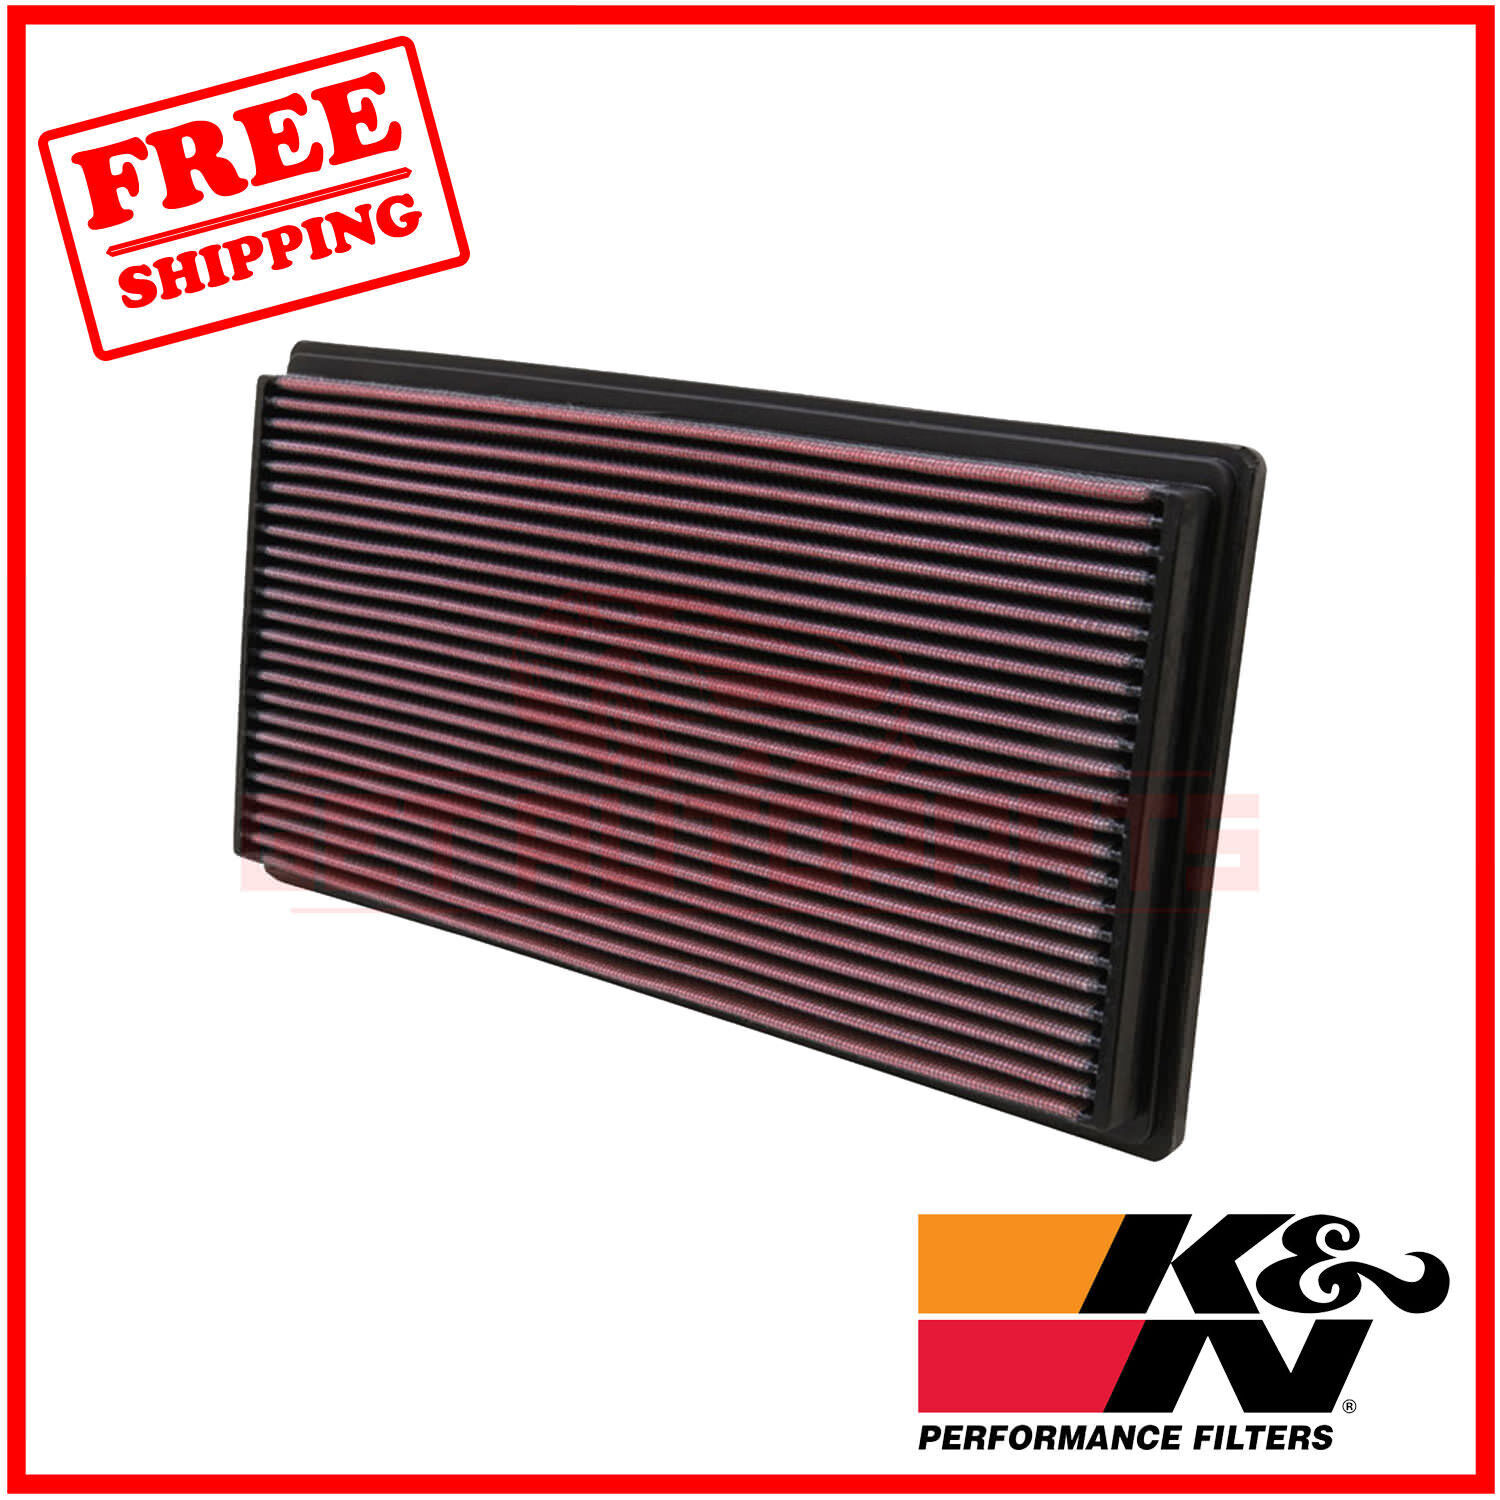 K&N Replacement Air Filter for Volvo S70 1998-2000